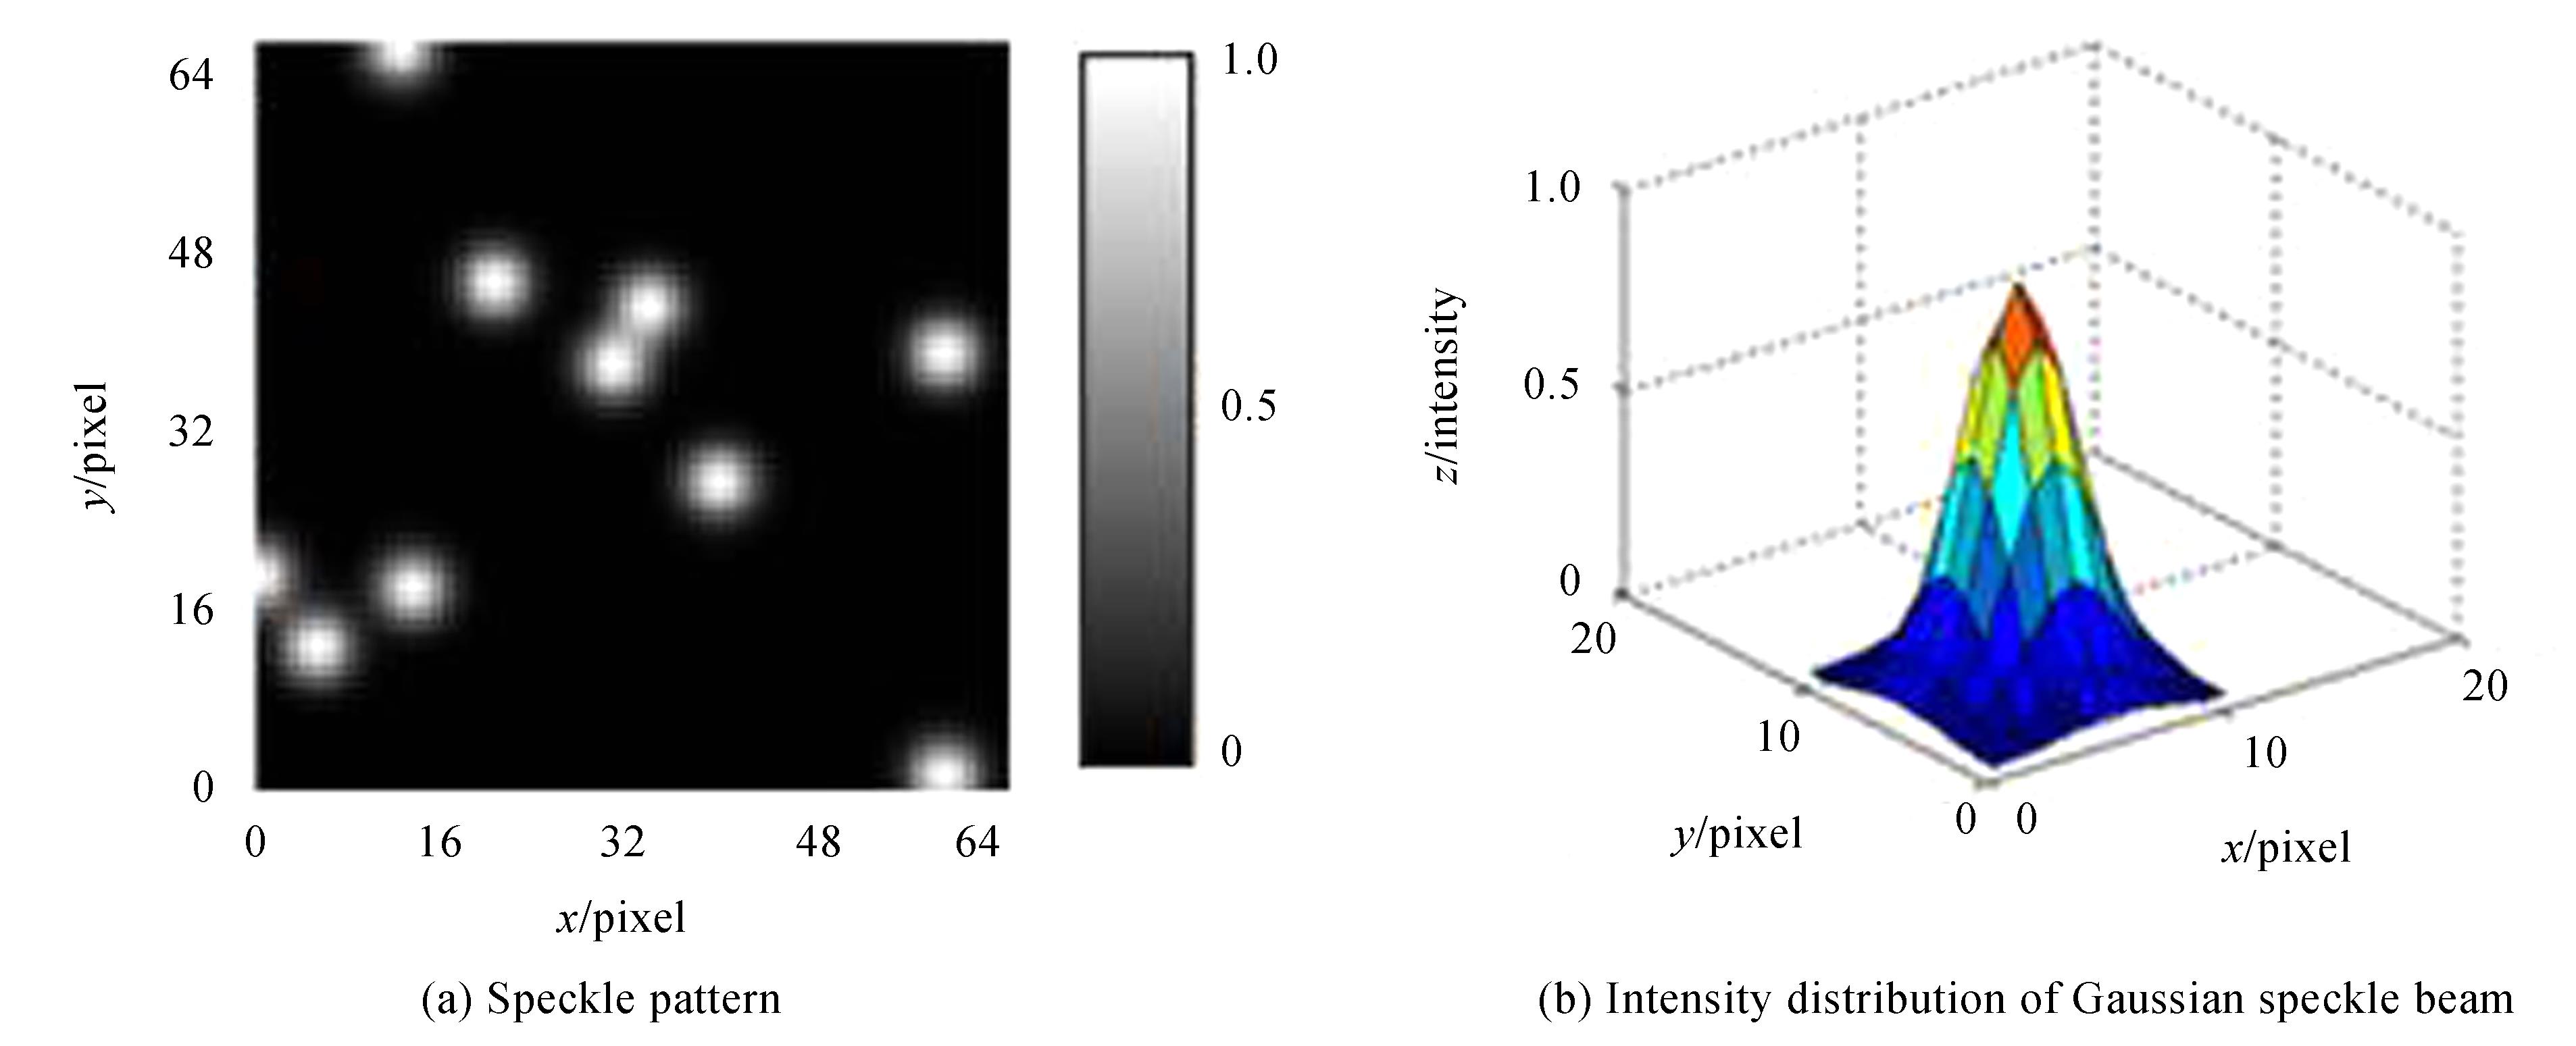 Speckle pattern and intensity distribution of Gaussian speckle beam